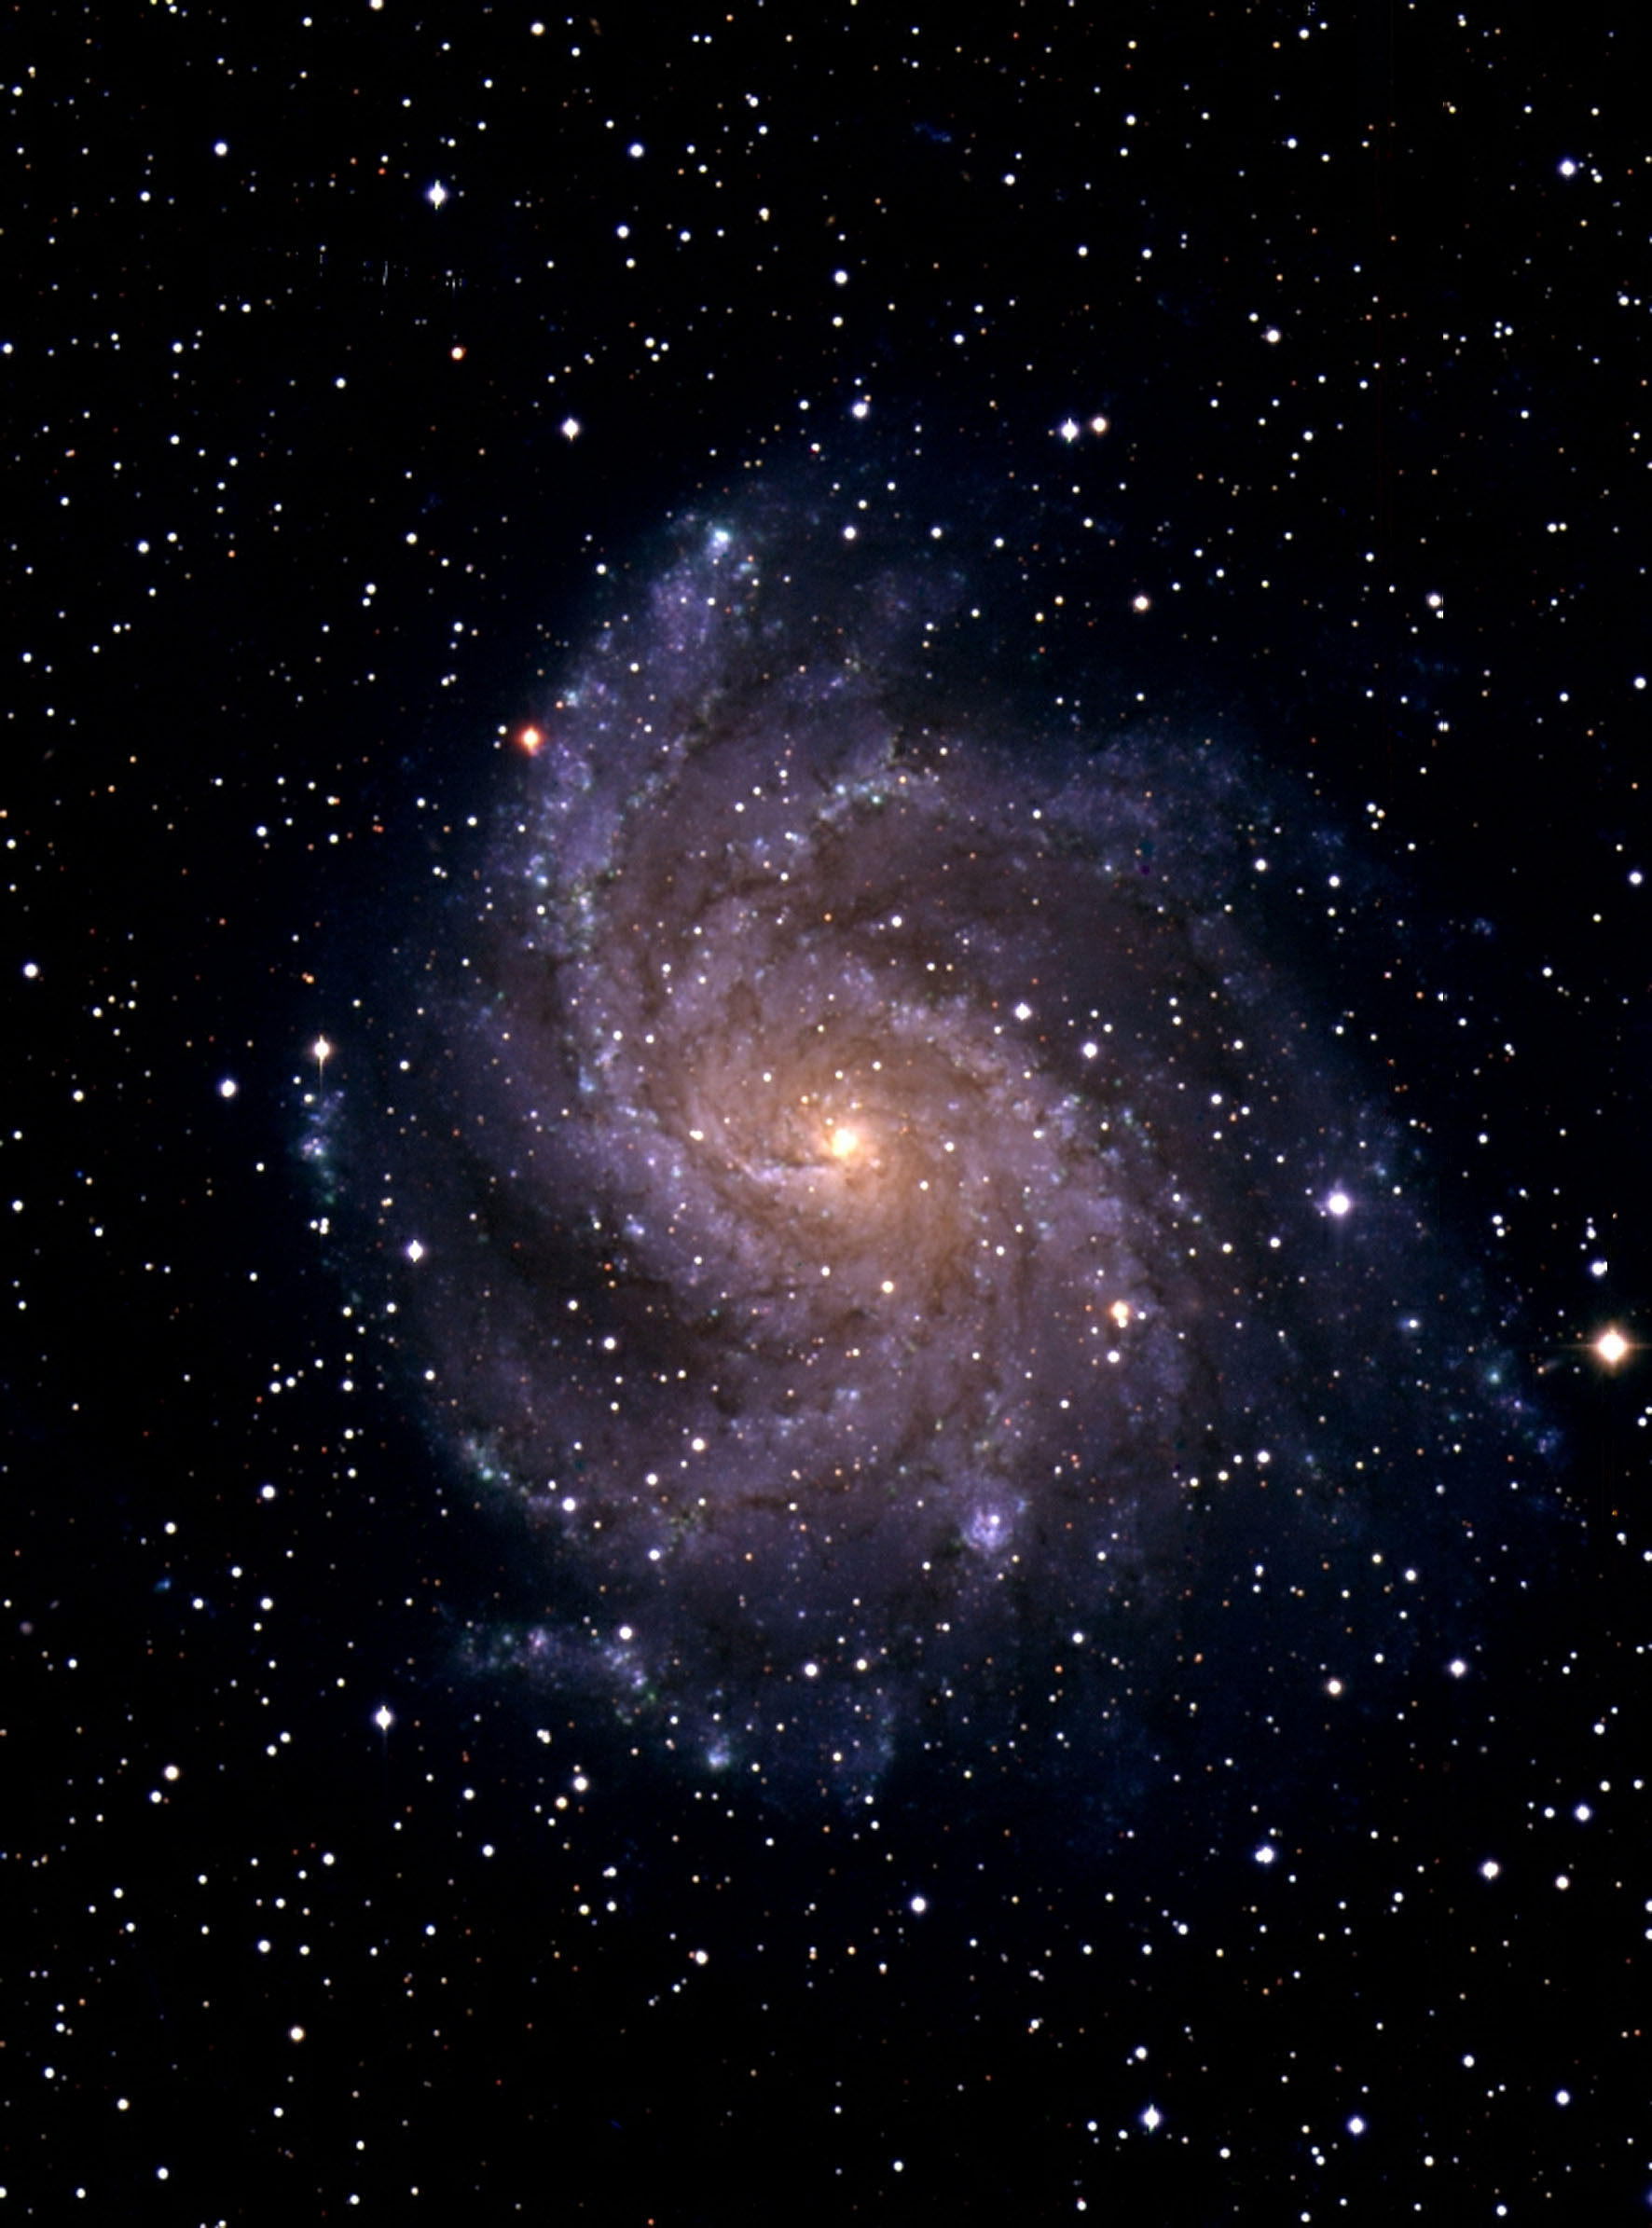 Galaxy M51 taken with the Isaac Newton Telescope and Wide Field Camera by Simon Driver